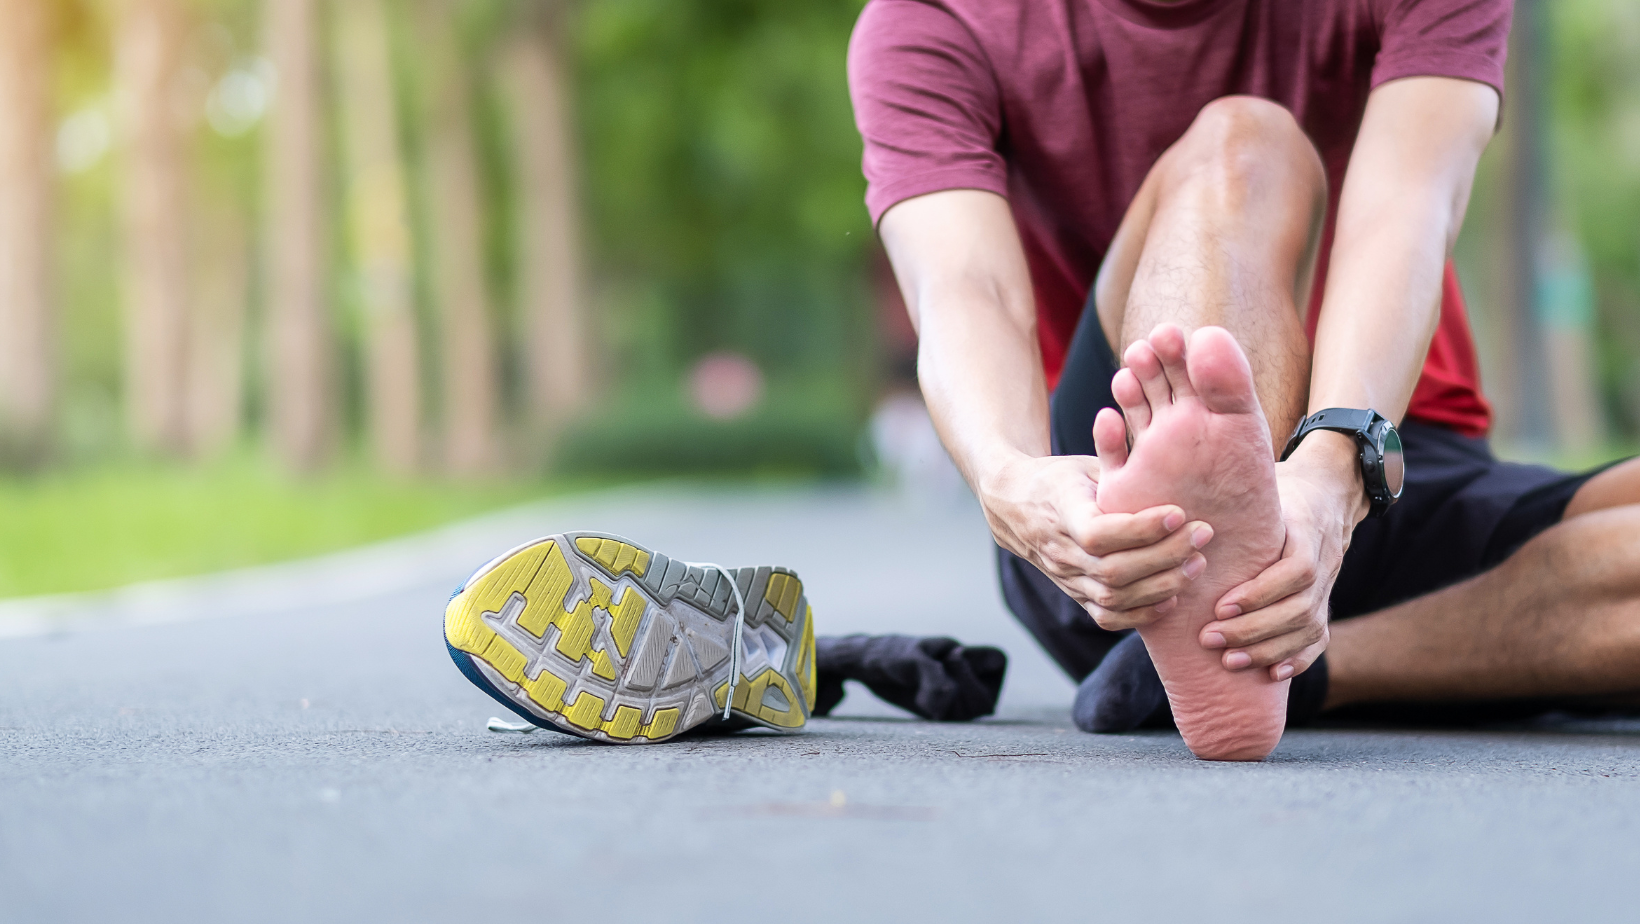 Get Back on Your Feet with the Help of Foot Braces for Plantar Fasciitis